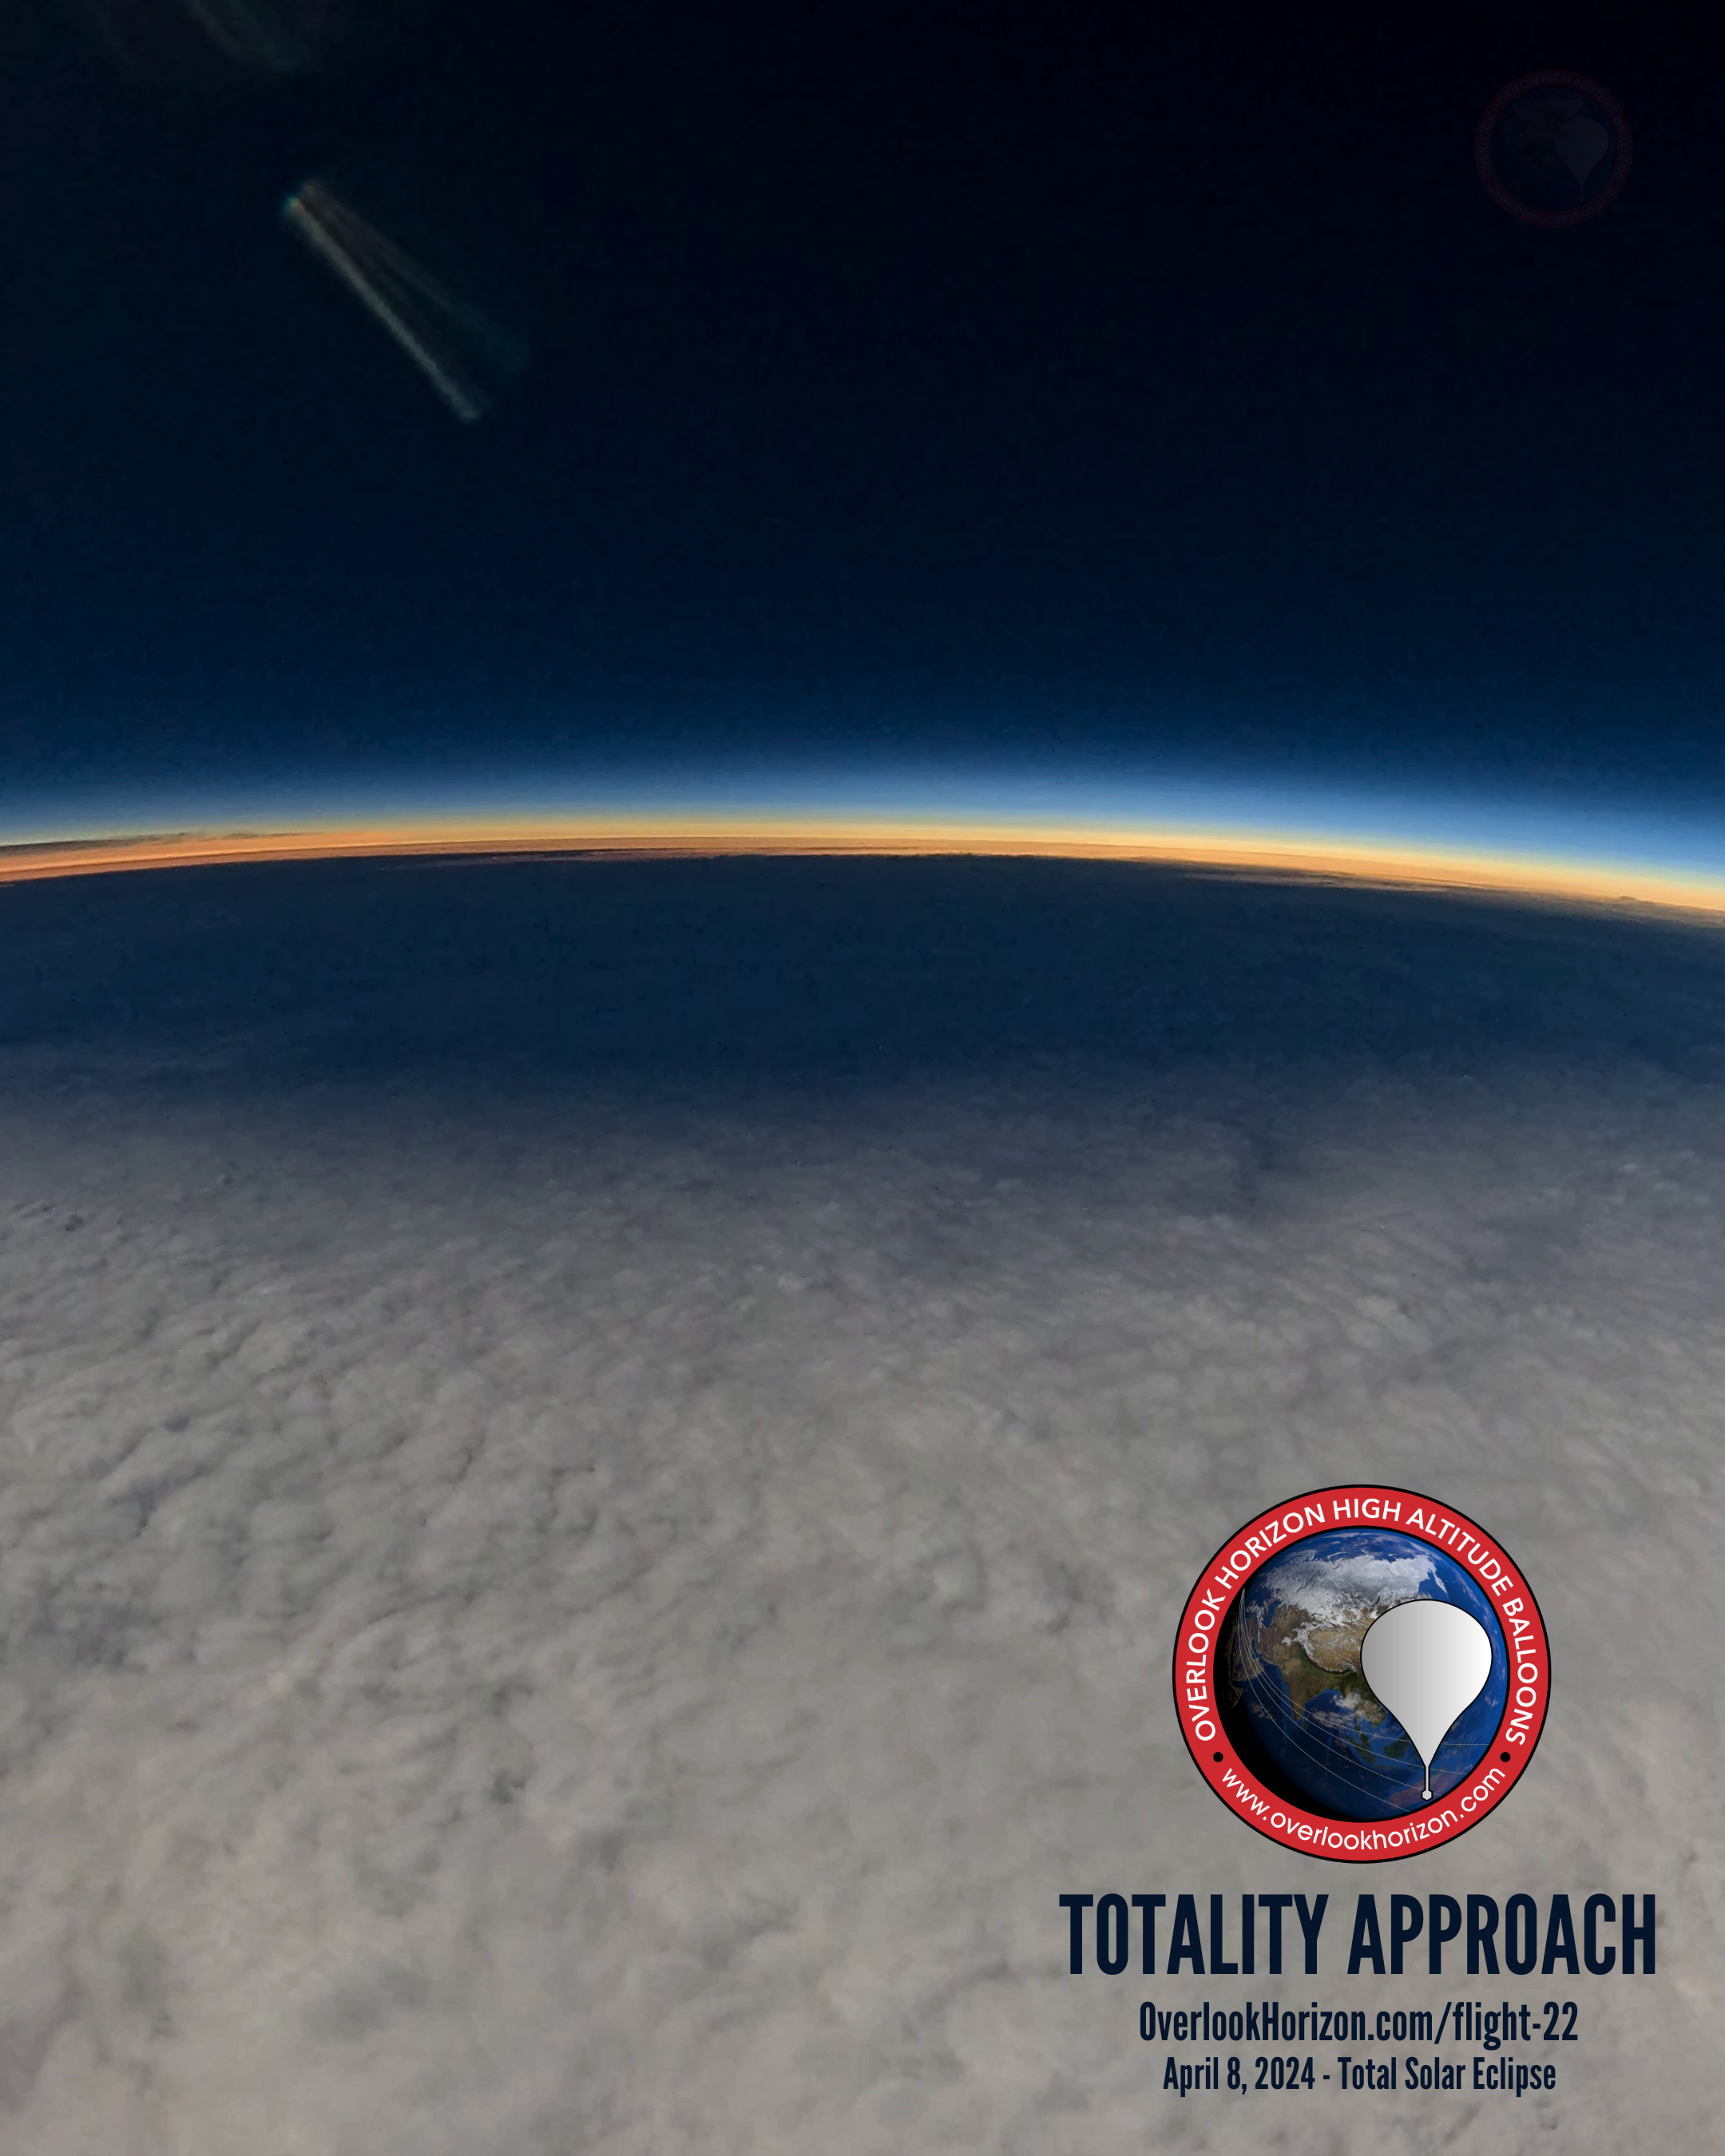 OLHZN-22 Solar Eclipse Totality from a Weather Balloon on April 8, 2024